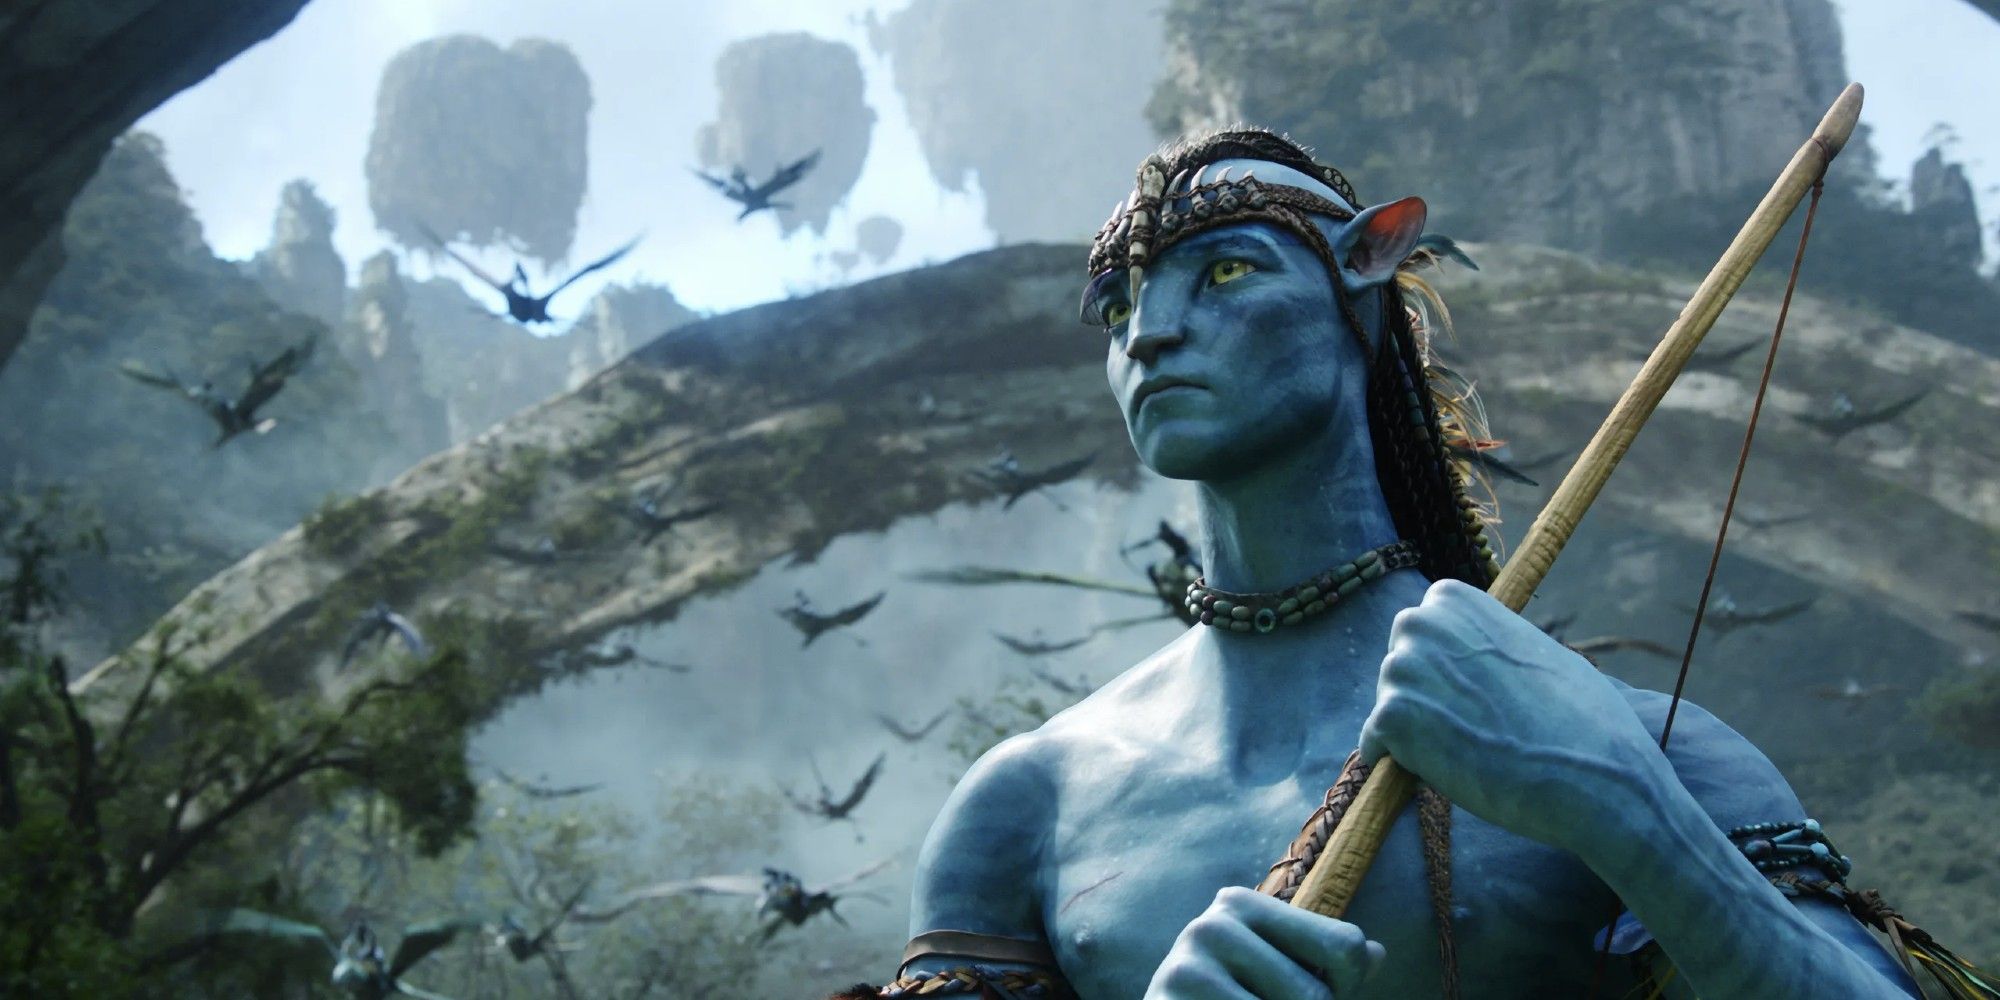 Jake Sully in his Na'vi form looks off into the distance at the Avatar.